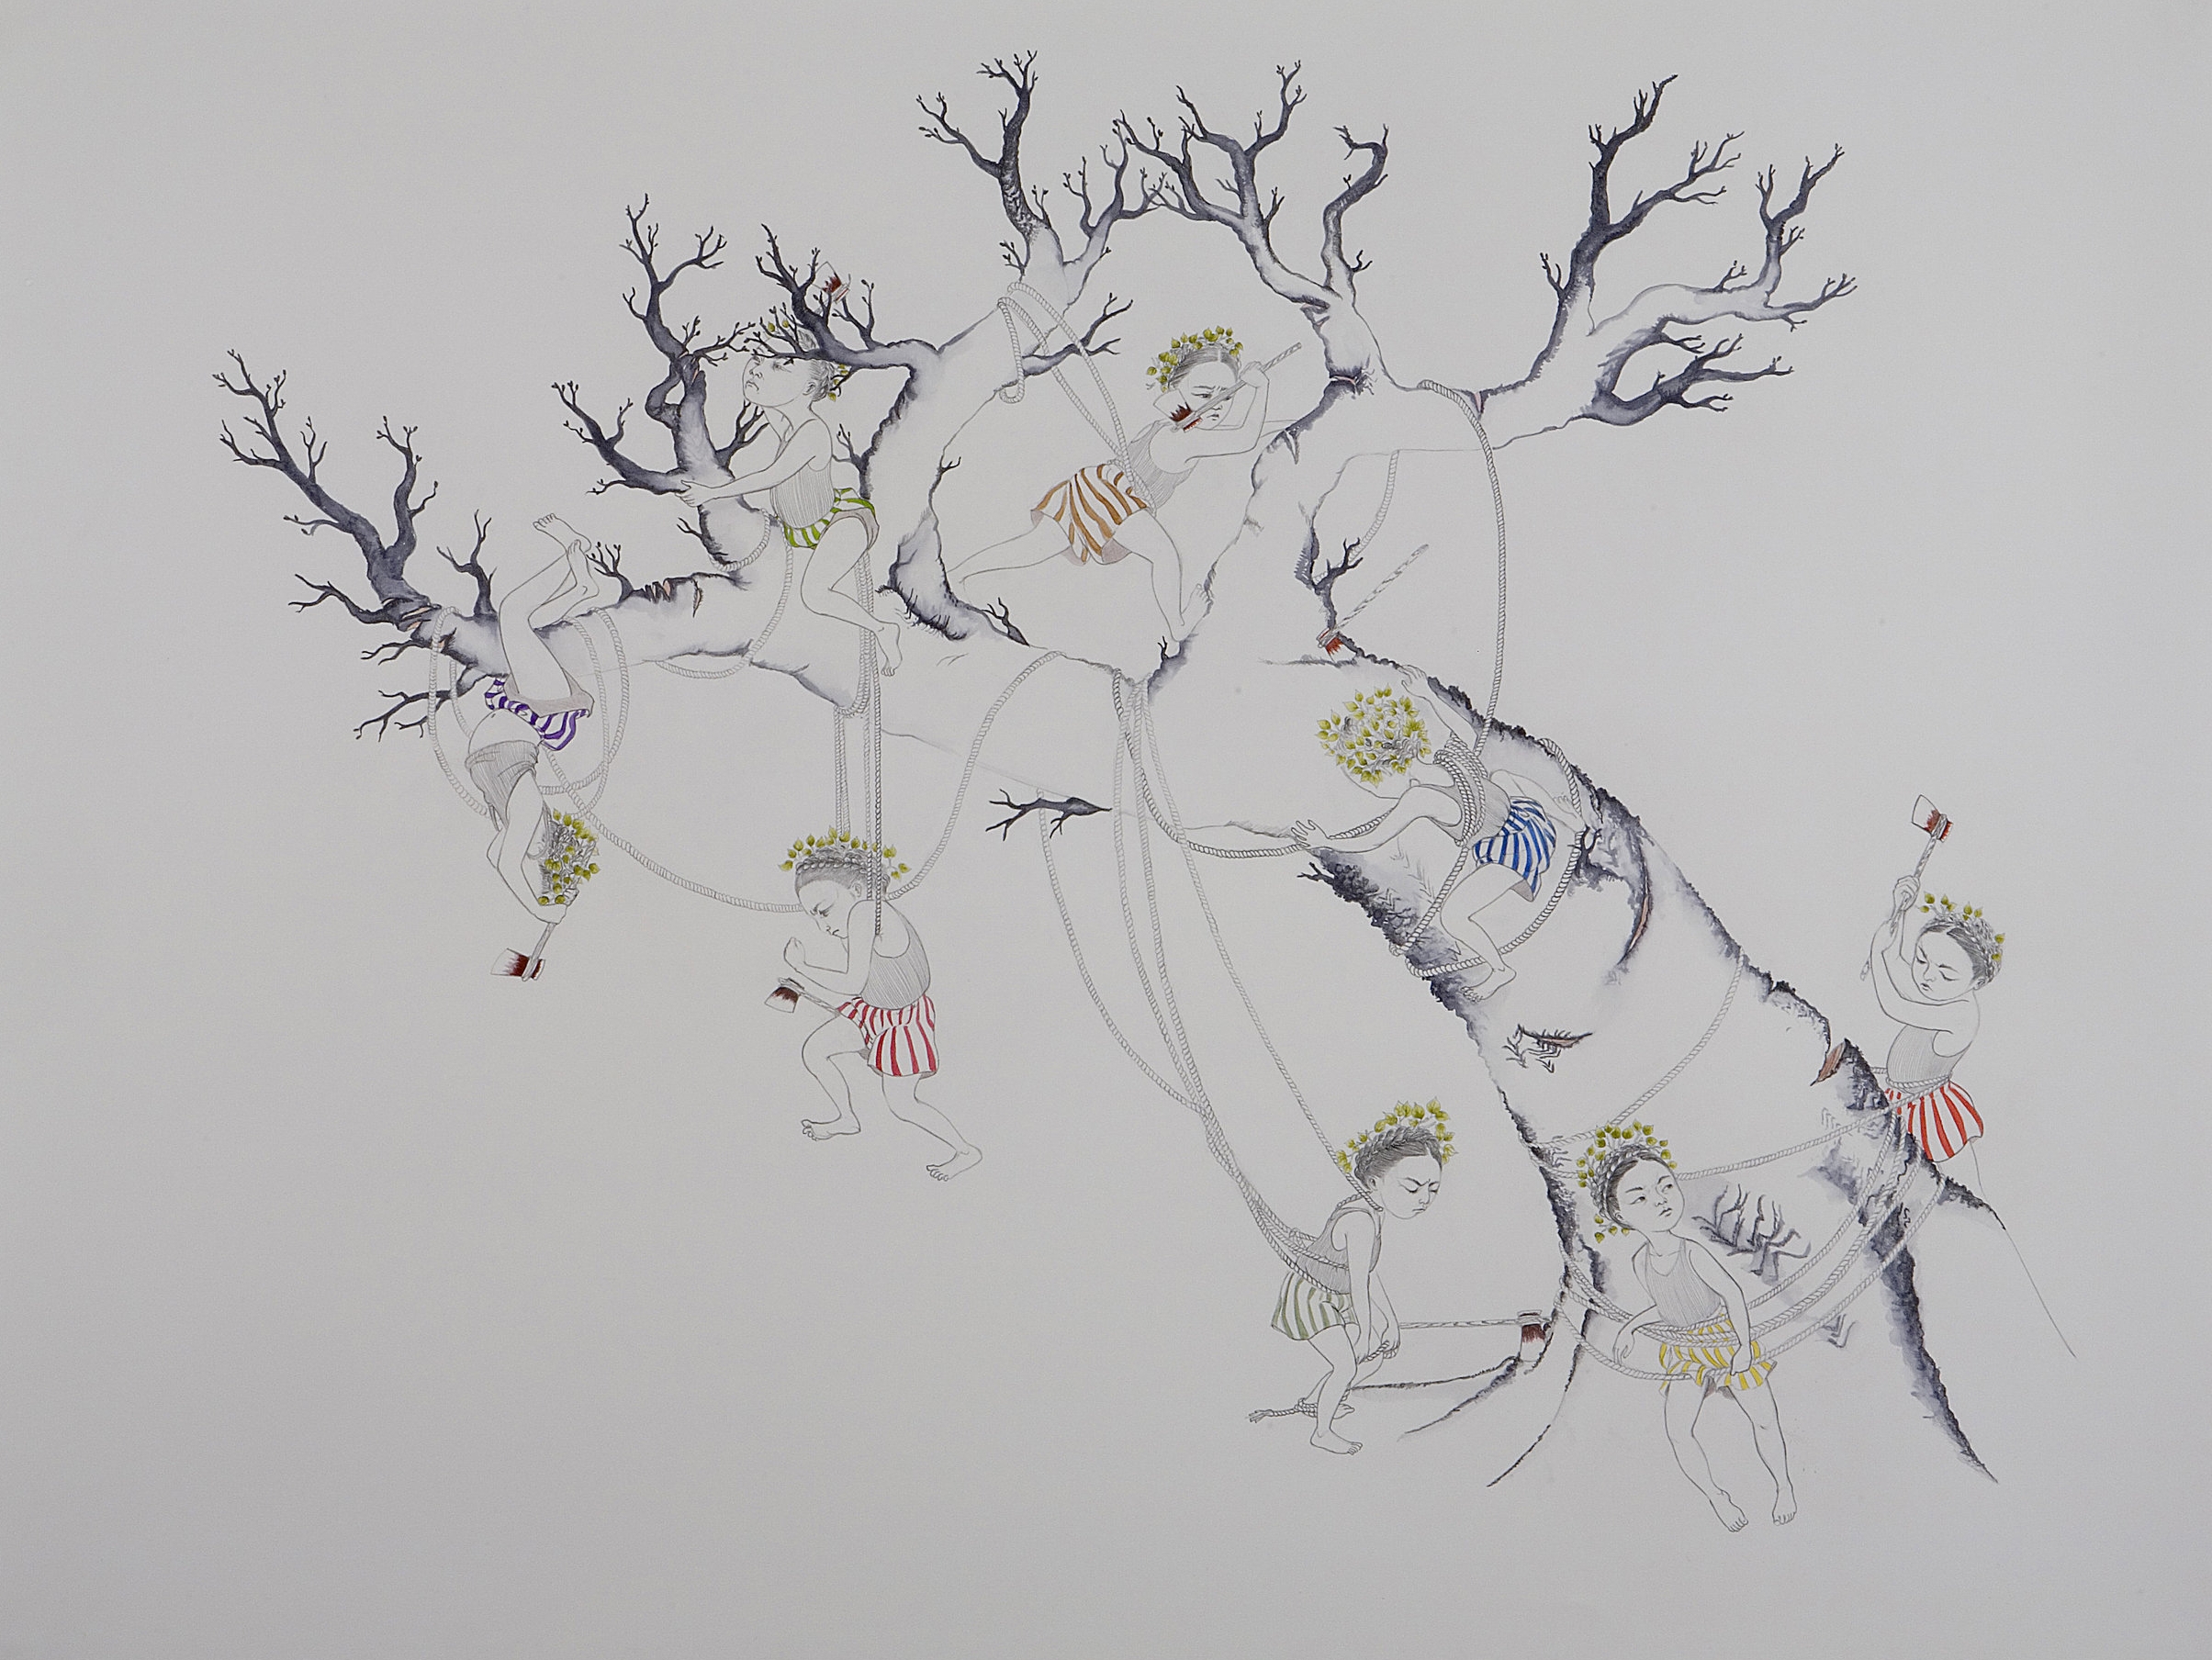   Taking Down A Giant , 2007 Graphite, watercolor, ink on paper 38 X 50 inches Private collection&nbsp; 